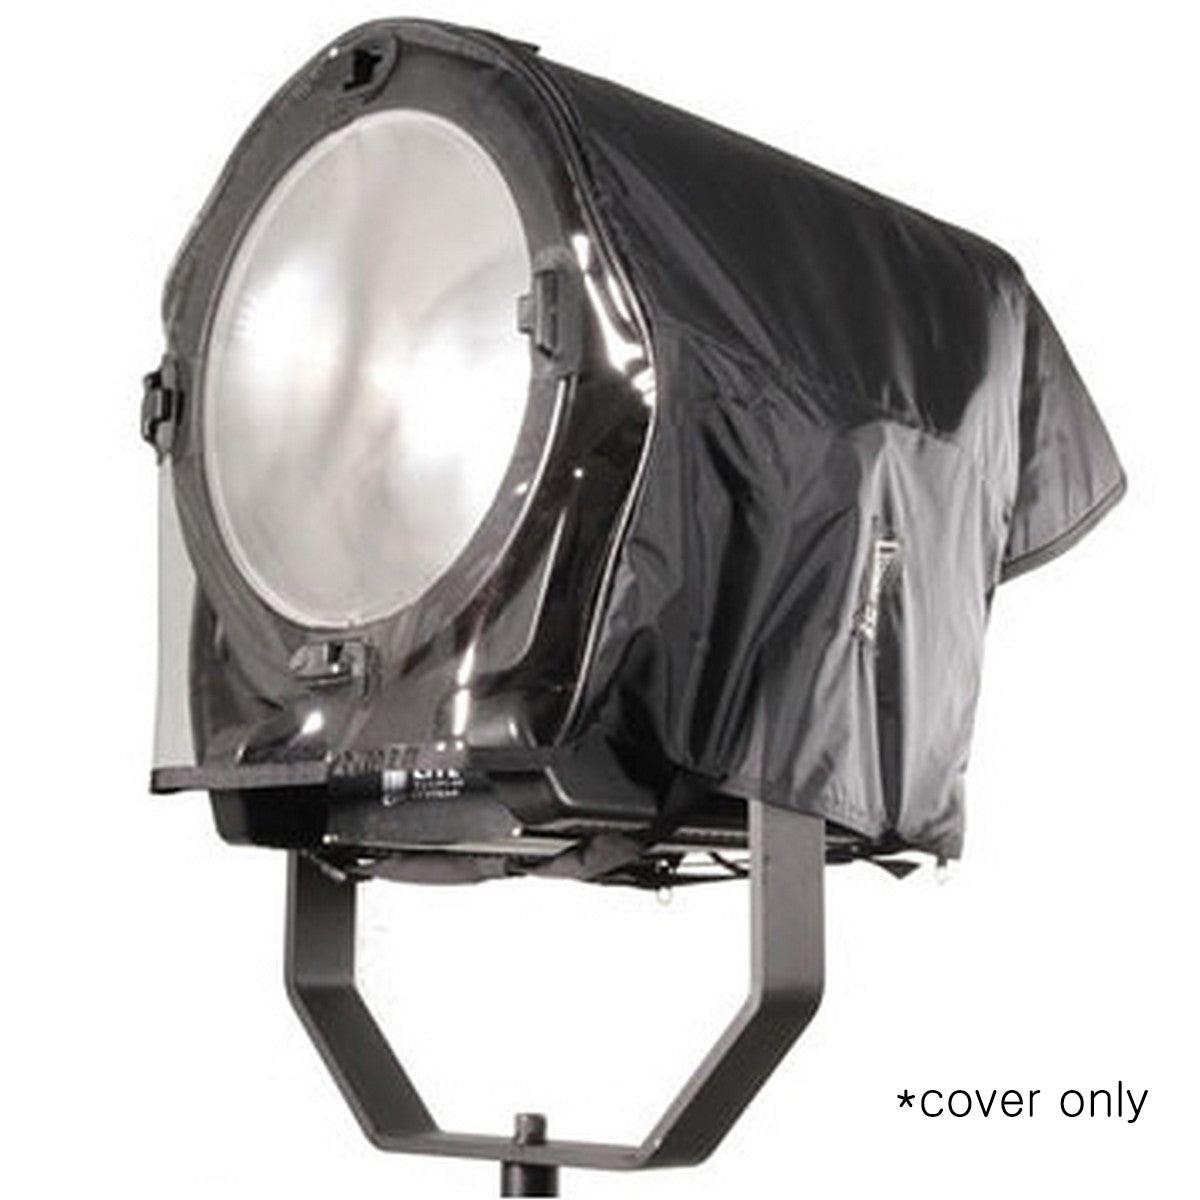 Litepanels Fixture Cover for Sola 12 and Inca 12 | Clear Plastic Front Cover 900-6252